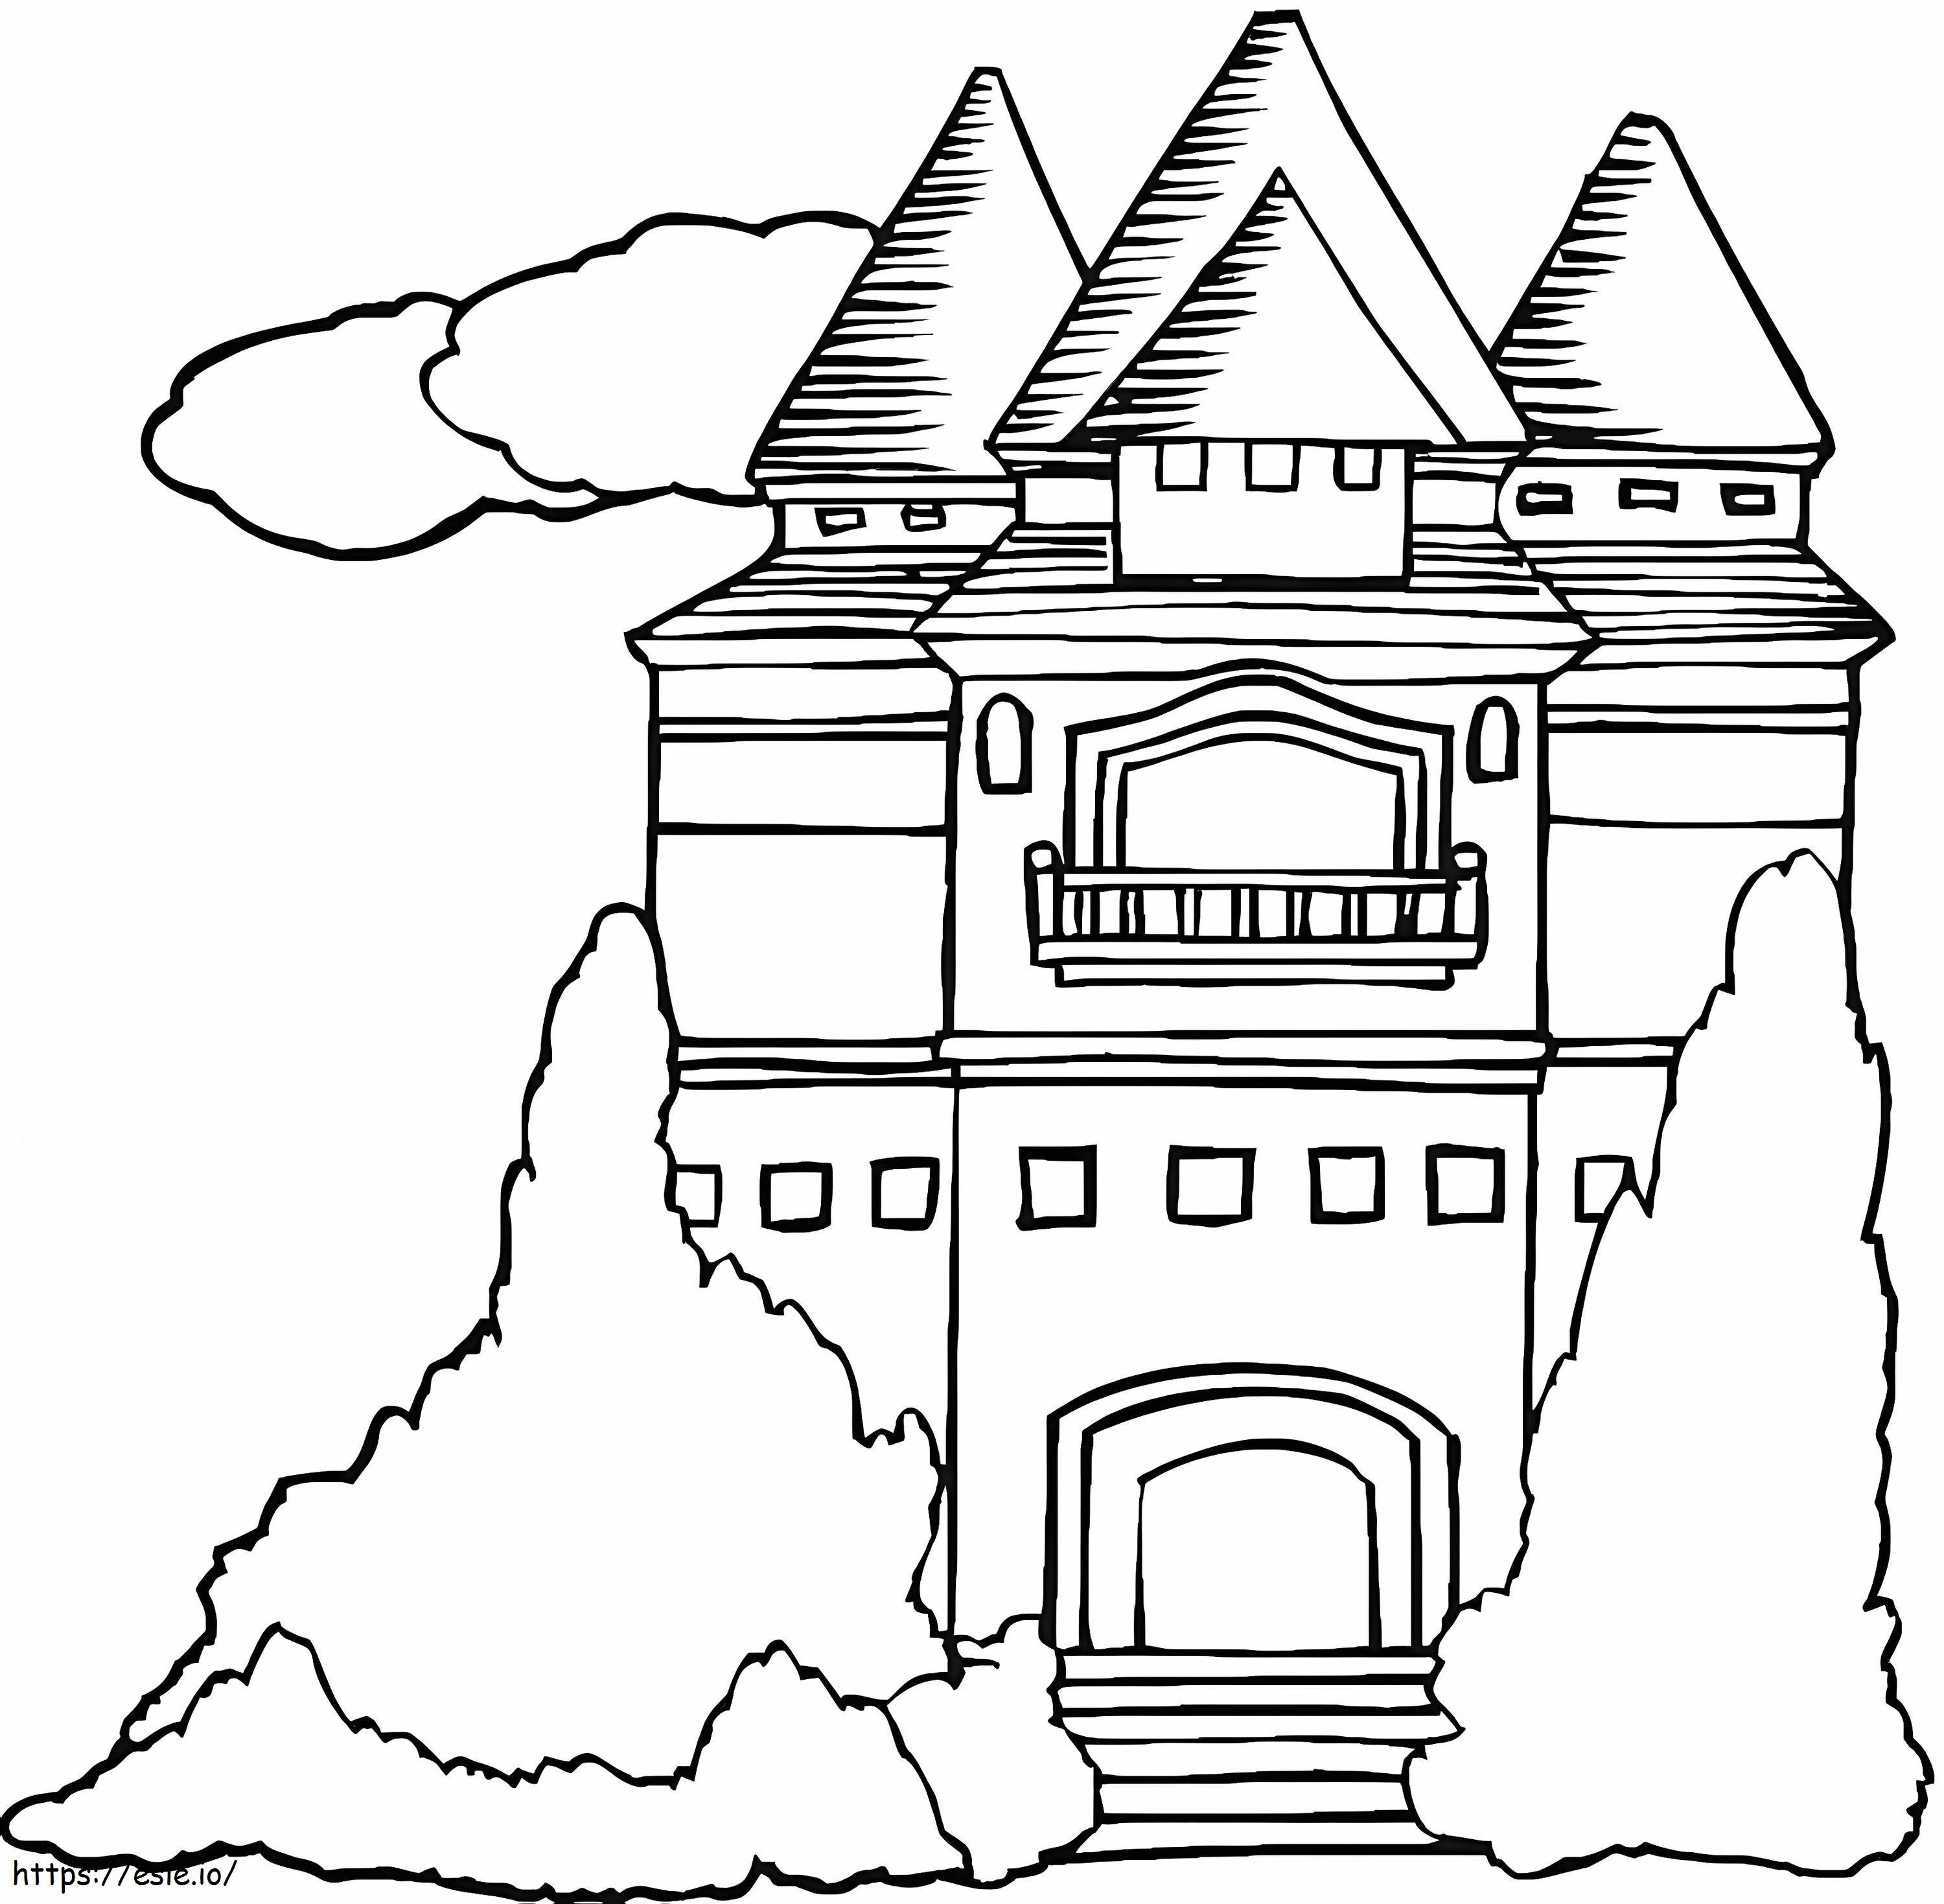 Normal Mansion coloring page